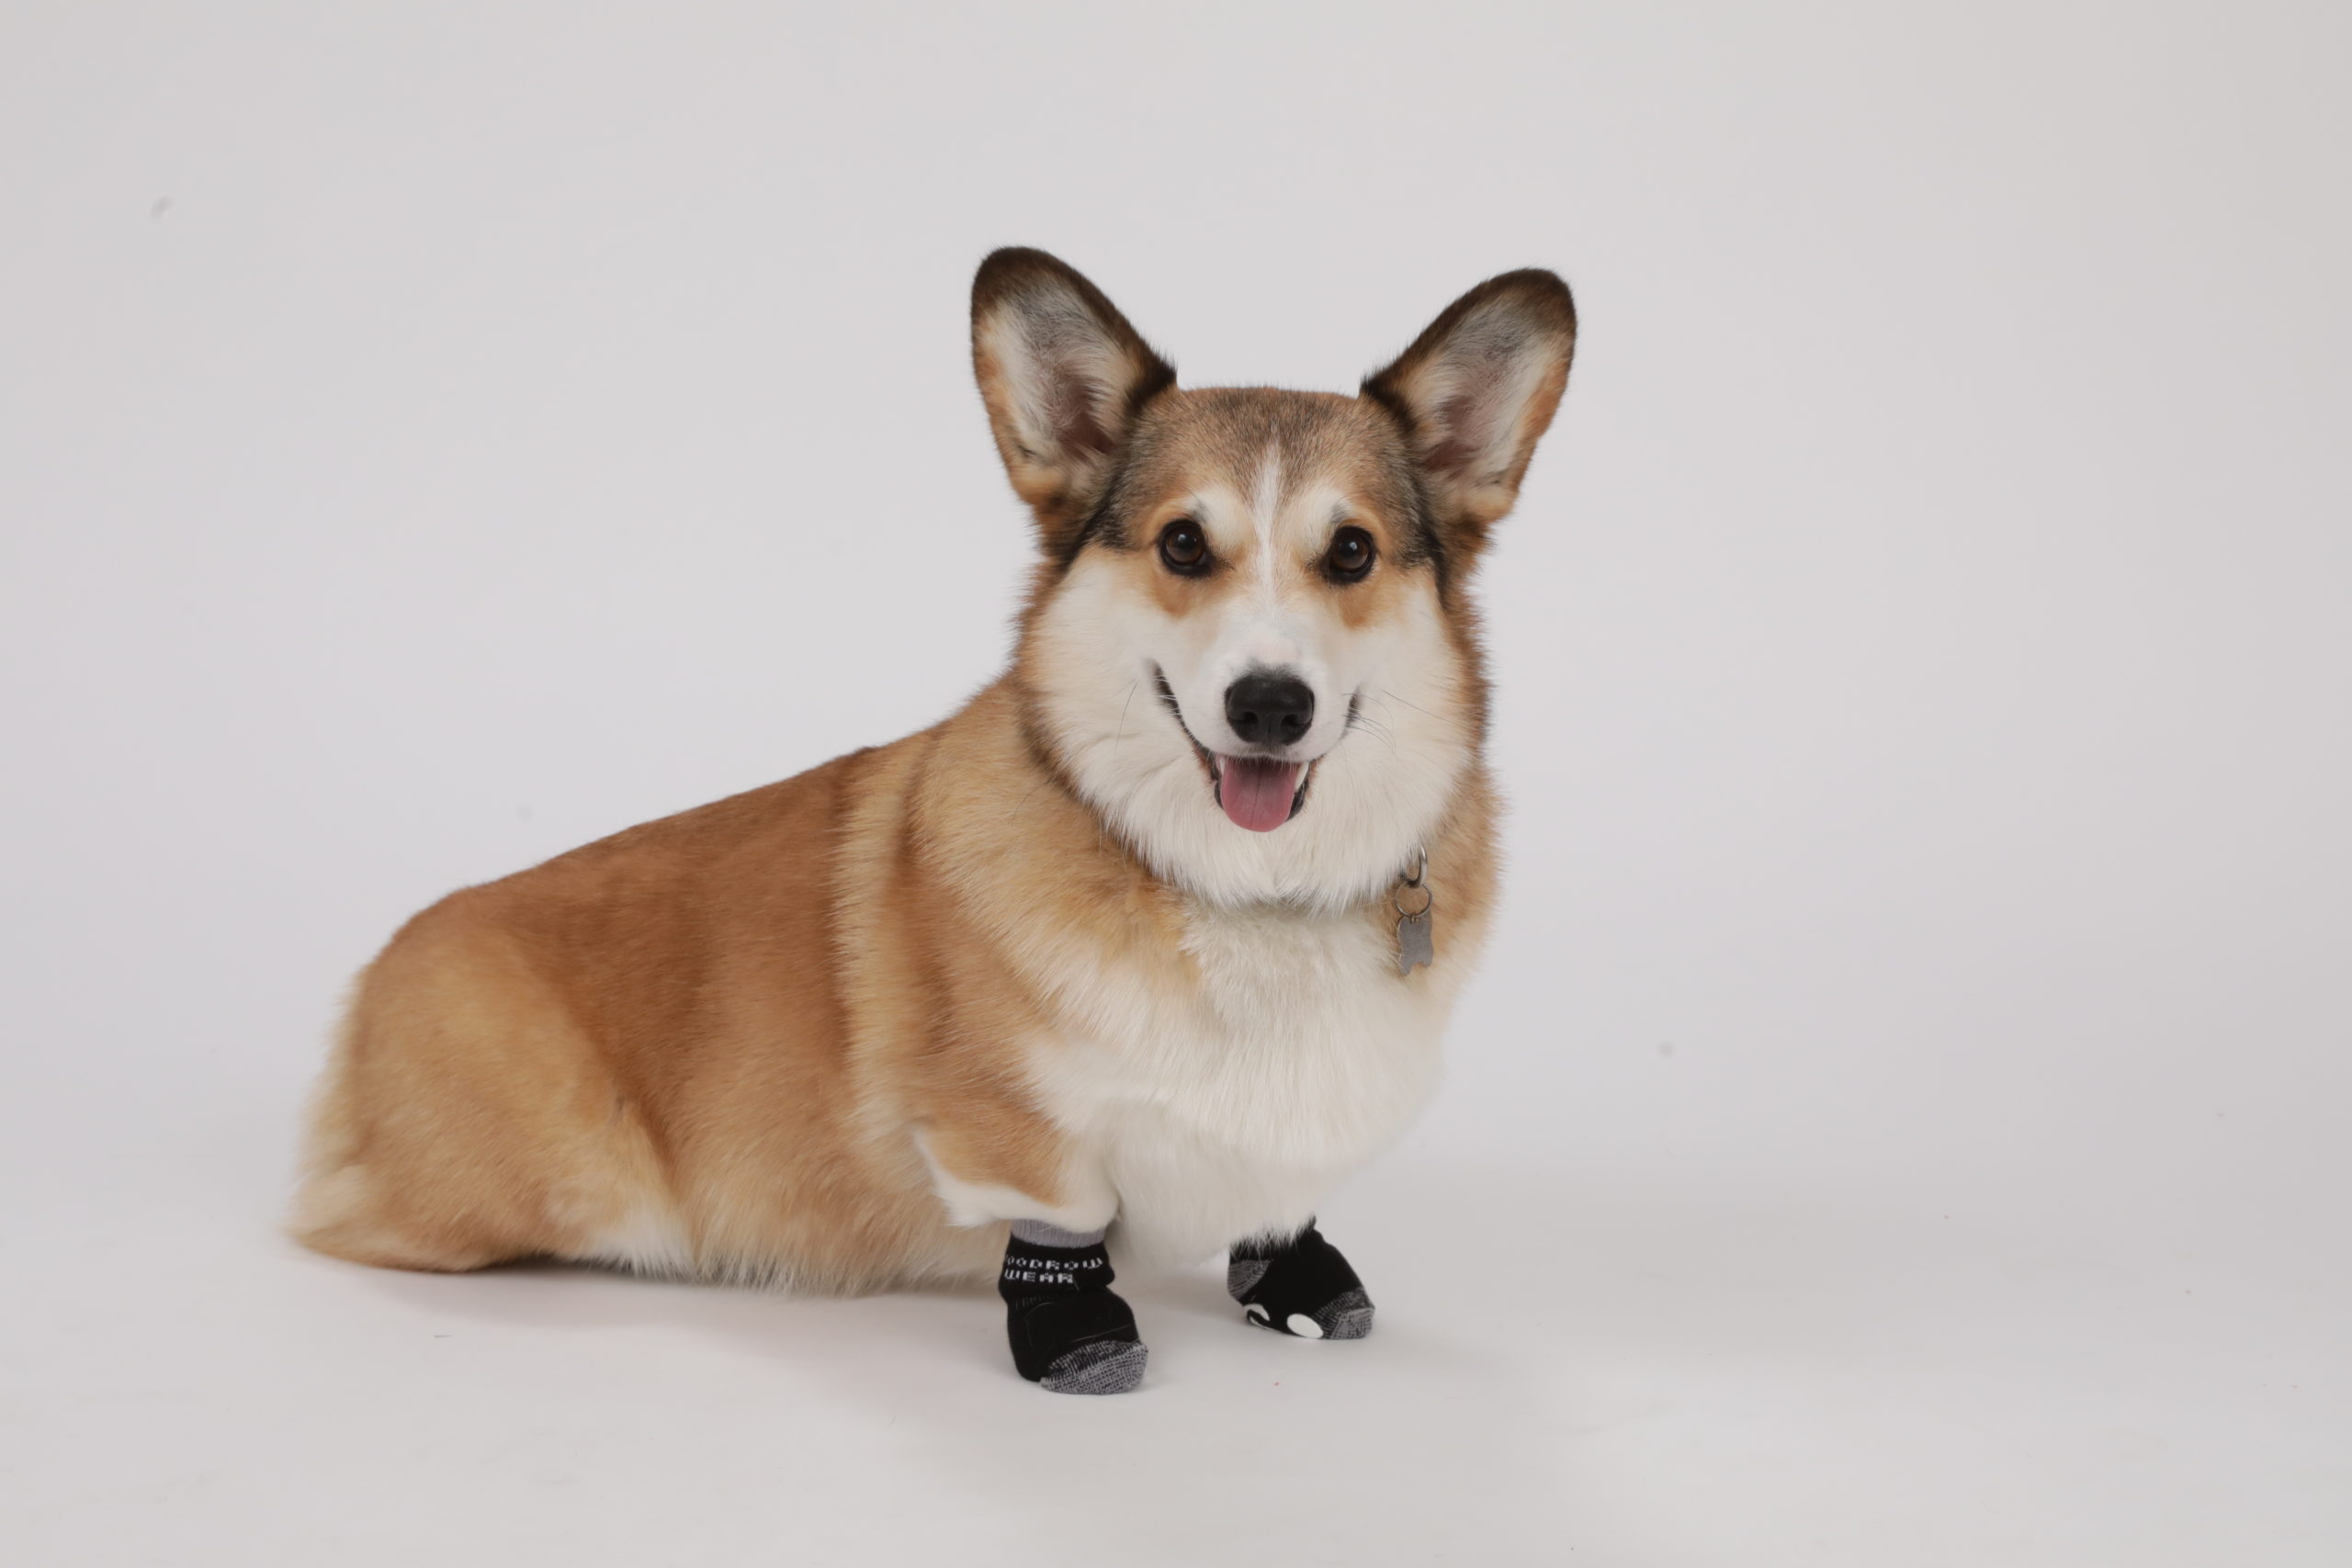 S with Reinforced Toe Traction Socks for Dogs Woodrow Wear Power Paws Advanced fits up to 45 lbs. Black & Gray 